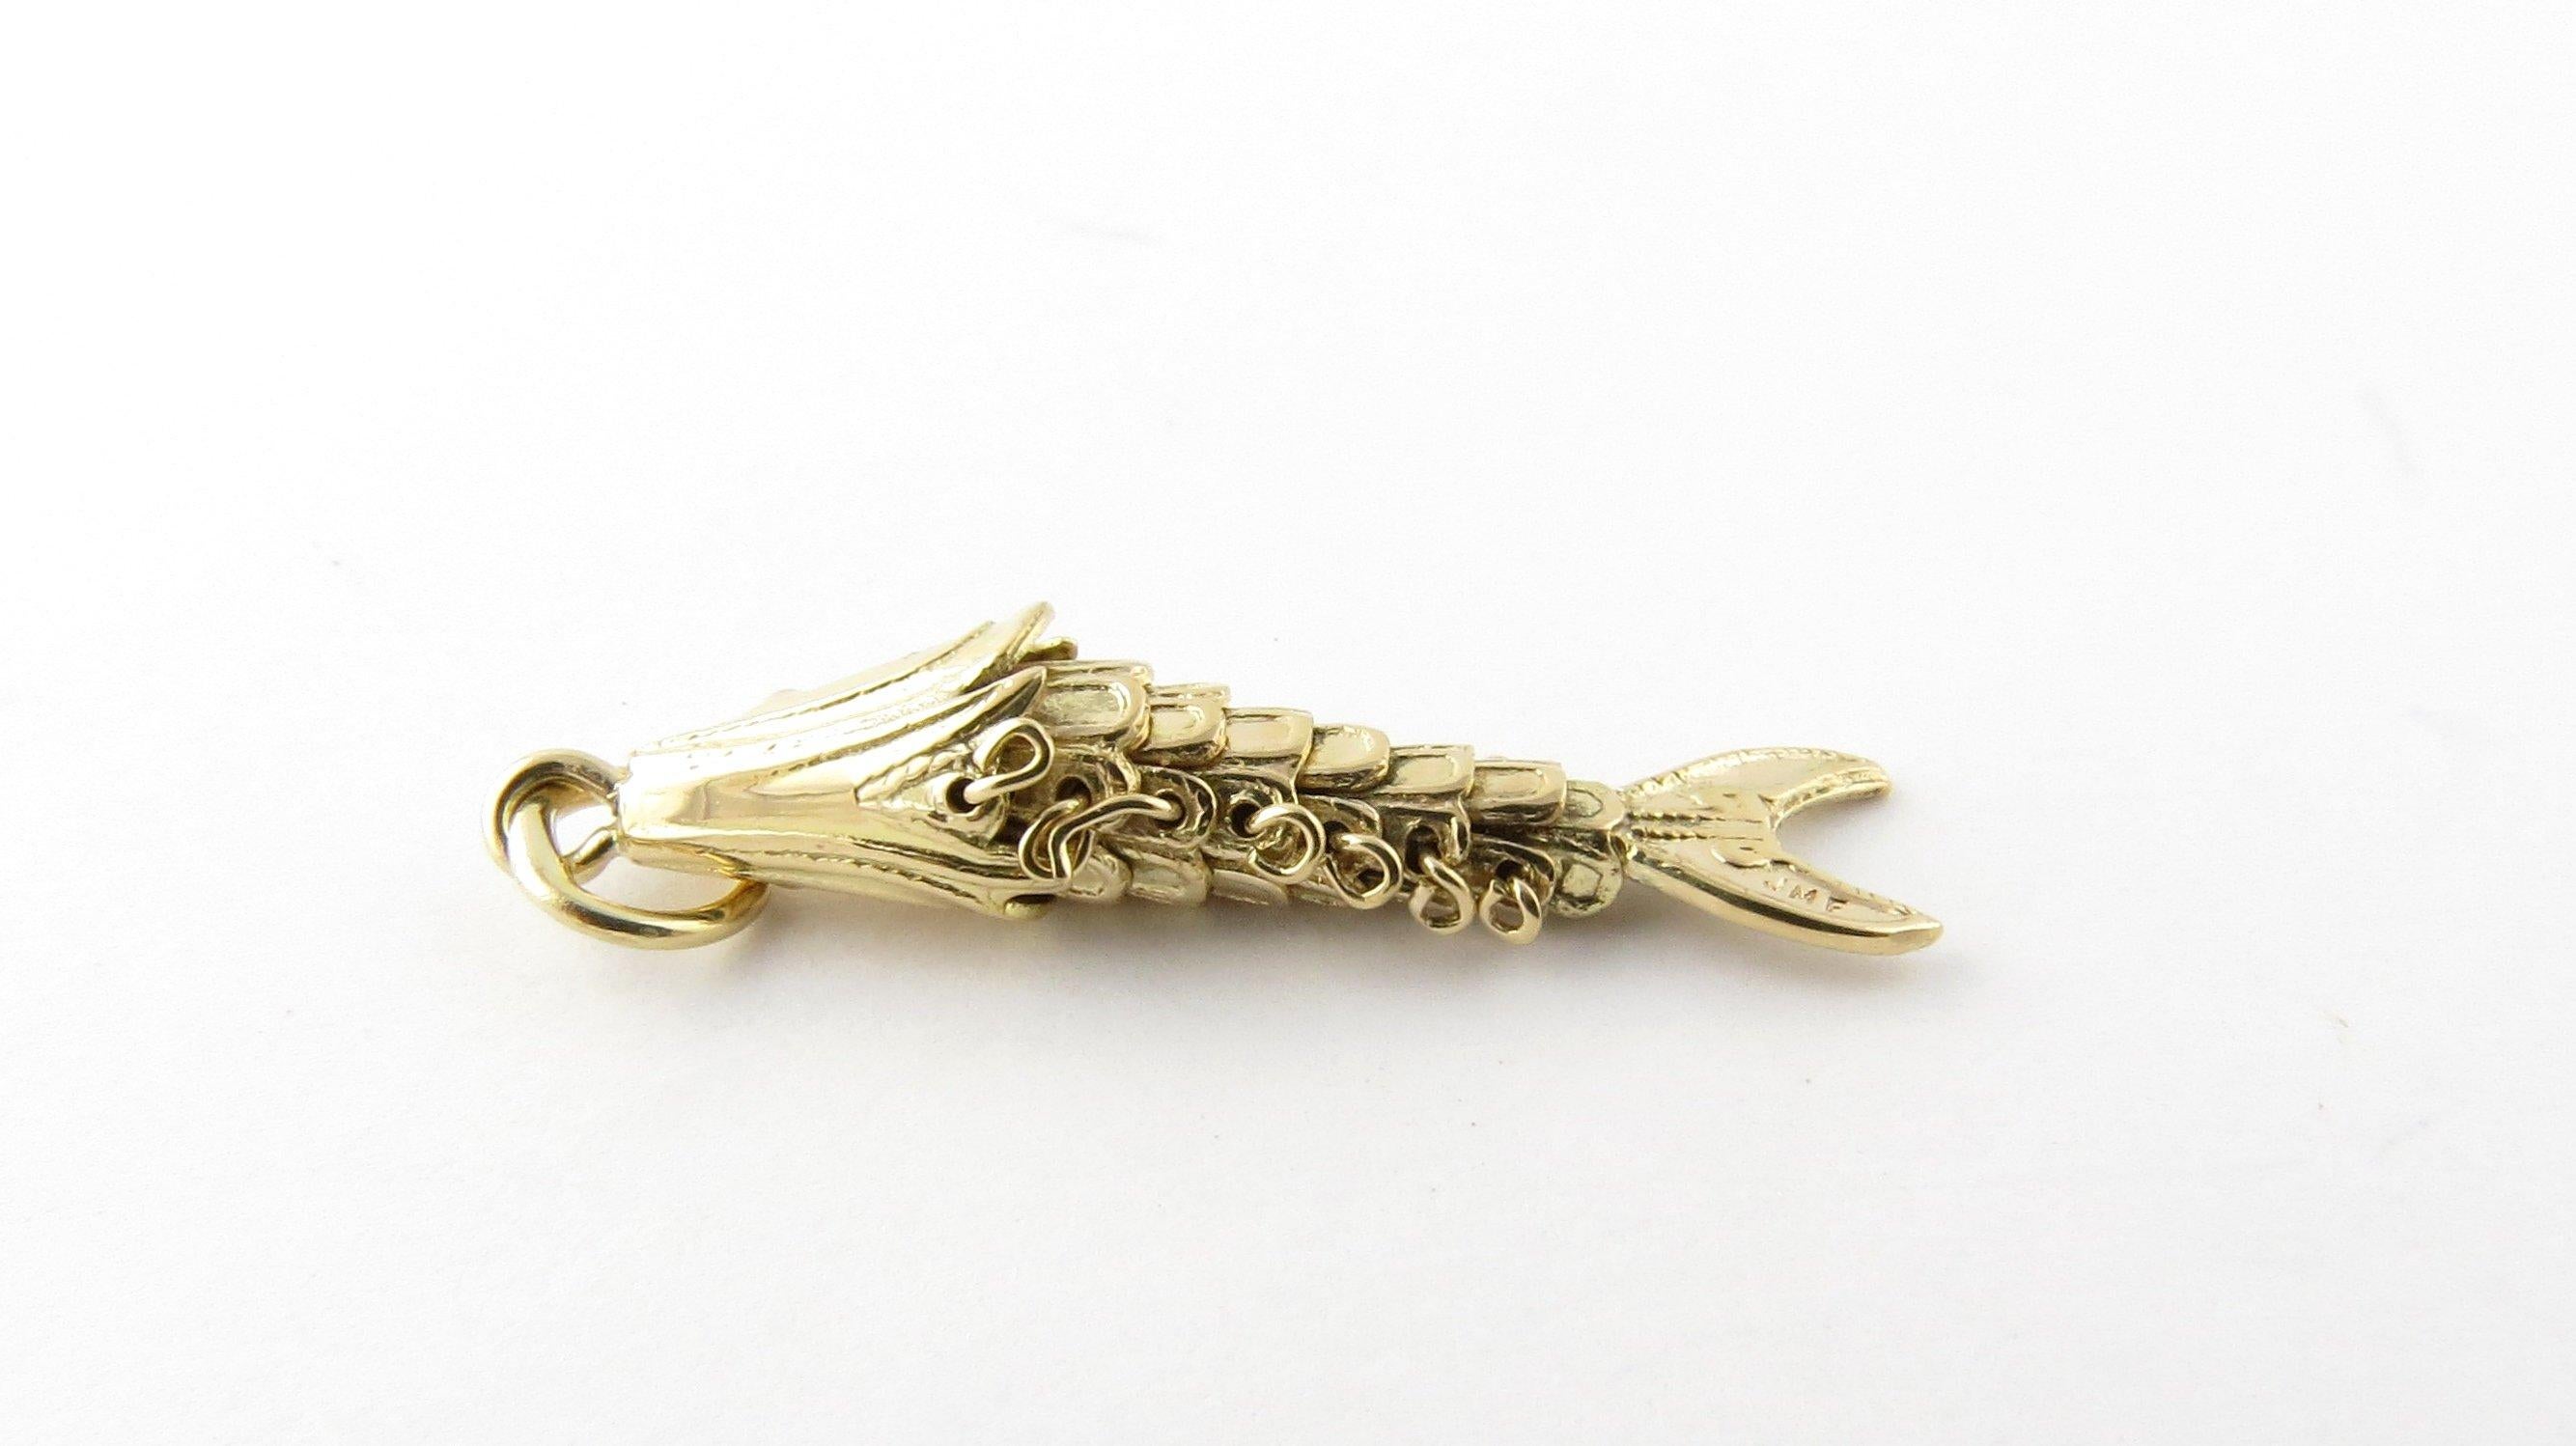 Vintage 14 Karat Yellow Gold Articulated Fish Charm-

This lovely 3D articulated charm features a wriggling fish meticulously detailed in 14K yellow gold.

Size: 18 mm x 7 mm (actual charm)

Weight: 1.0 dwt. / 1.6 gr.

Hallmark: 14K

Very good